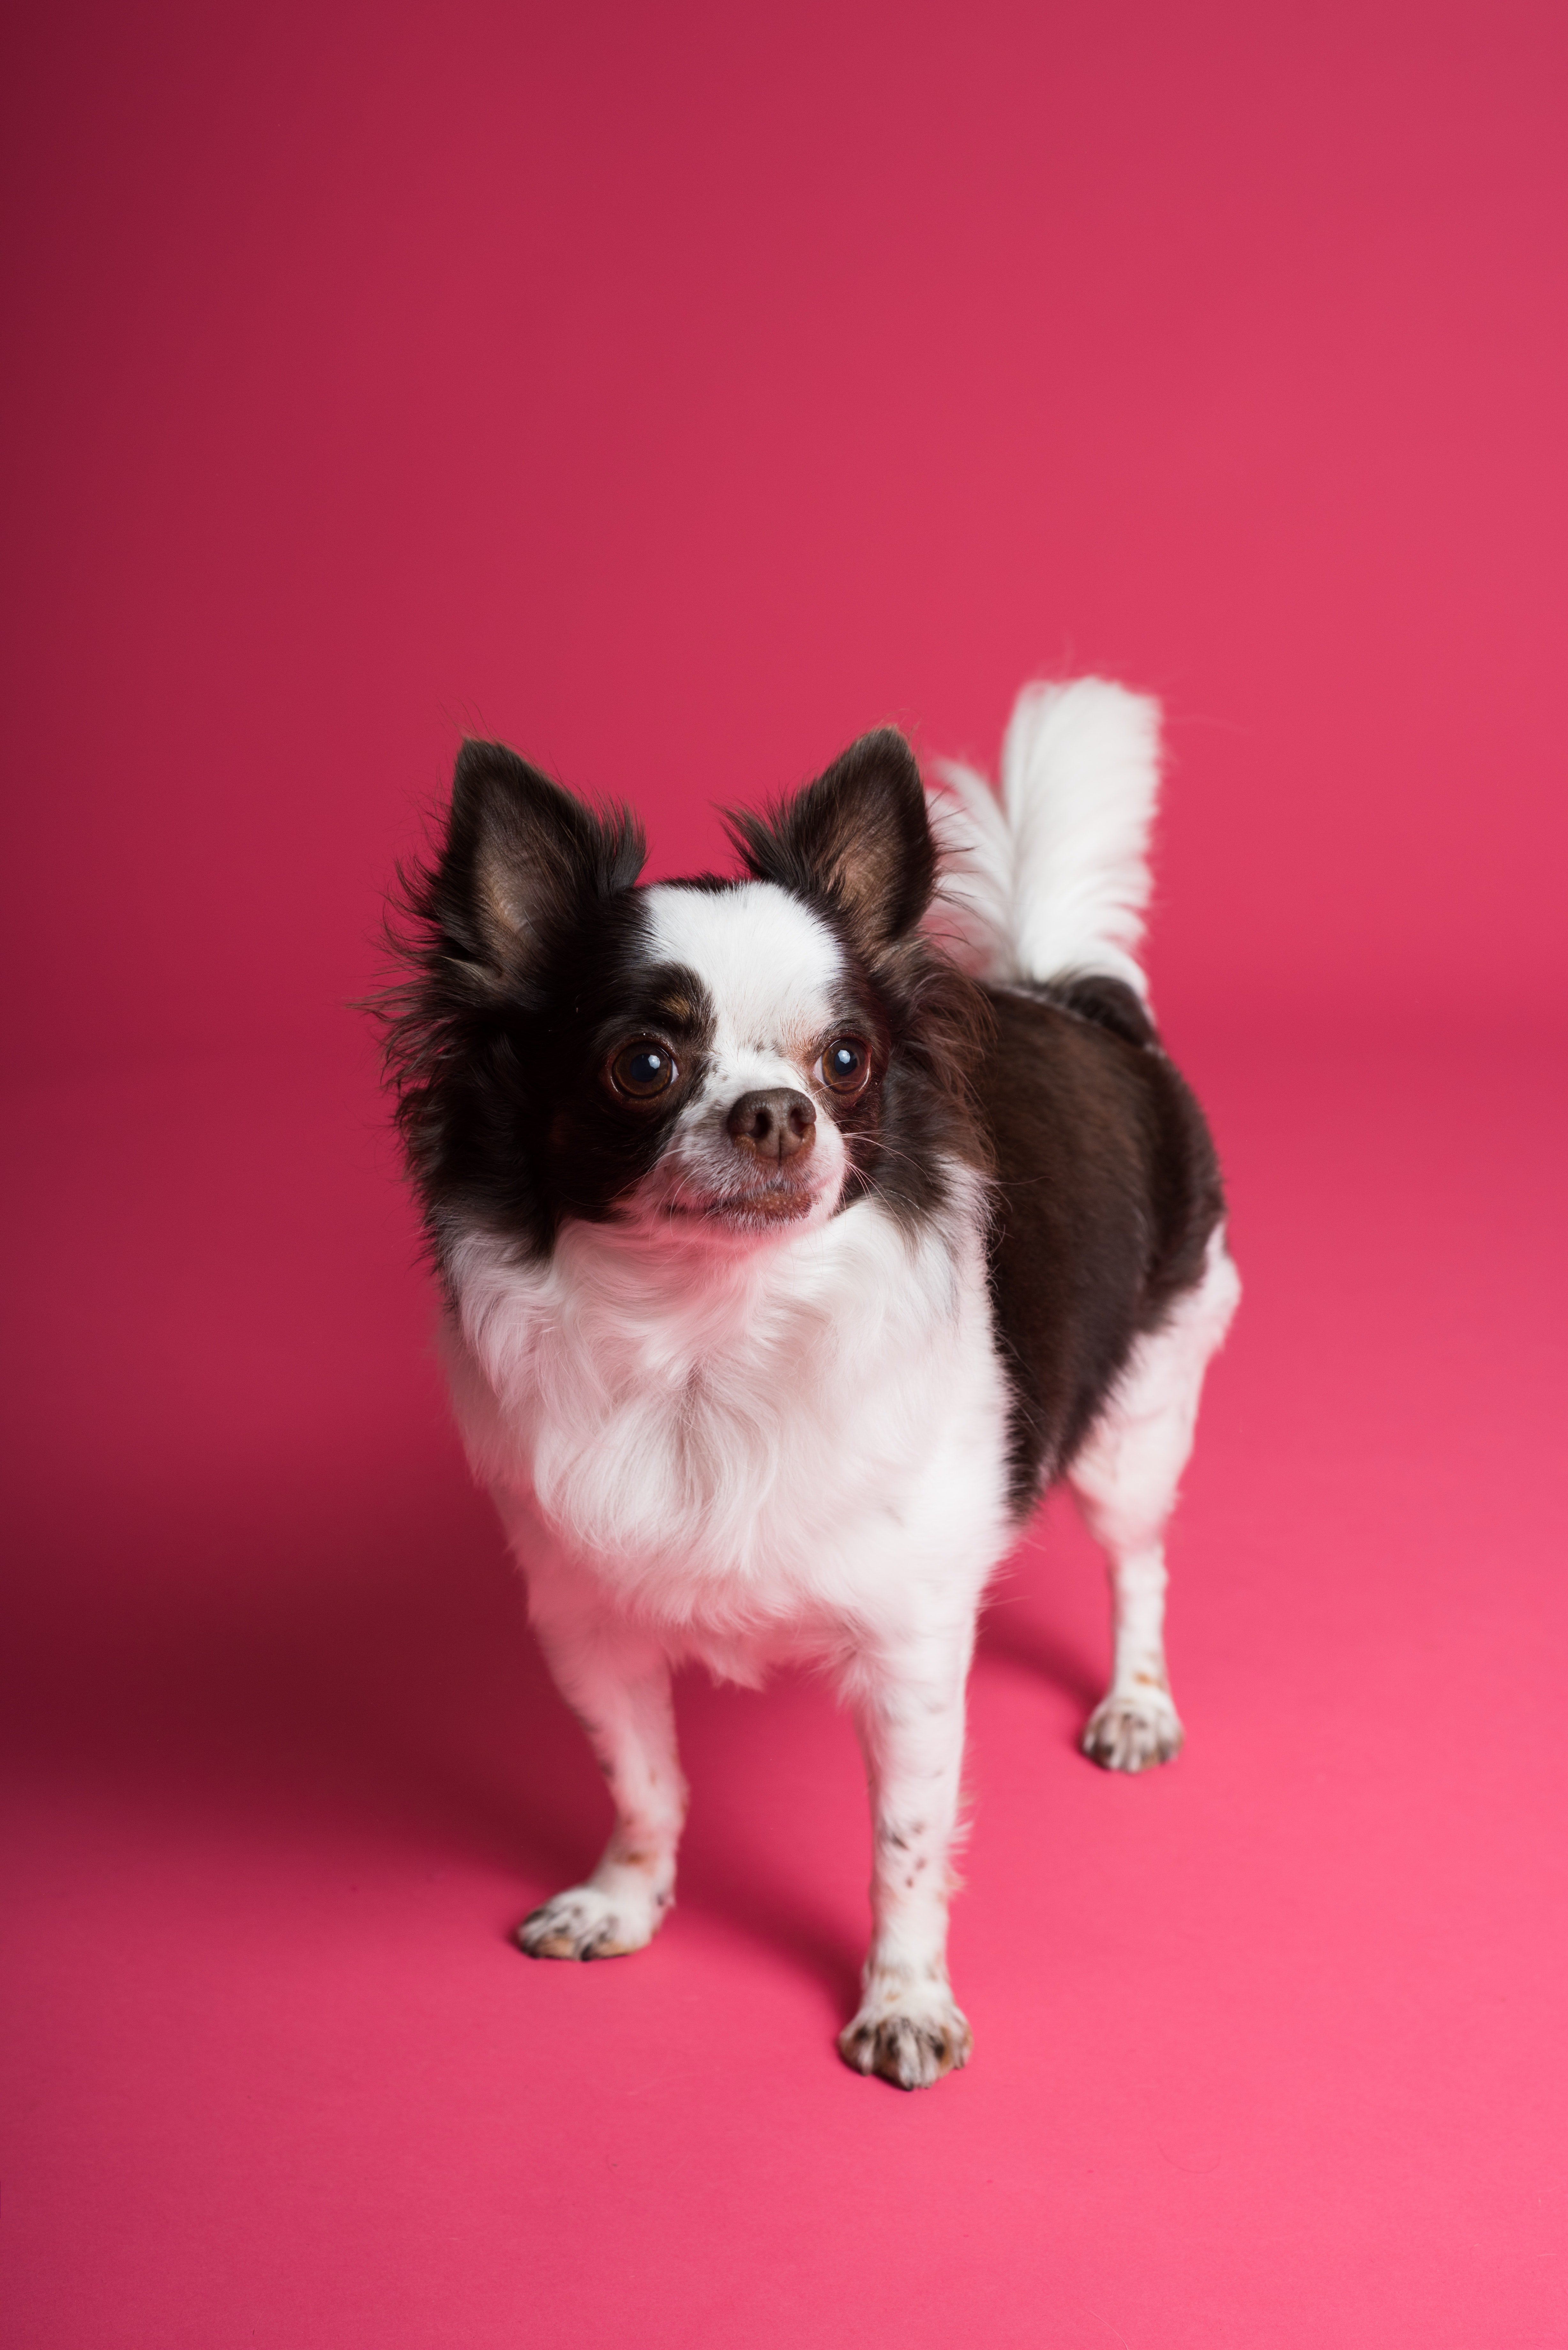 A Chihuahua on a pink background. | Photo: Pexels